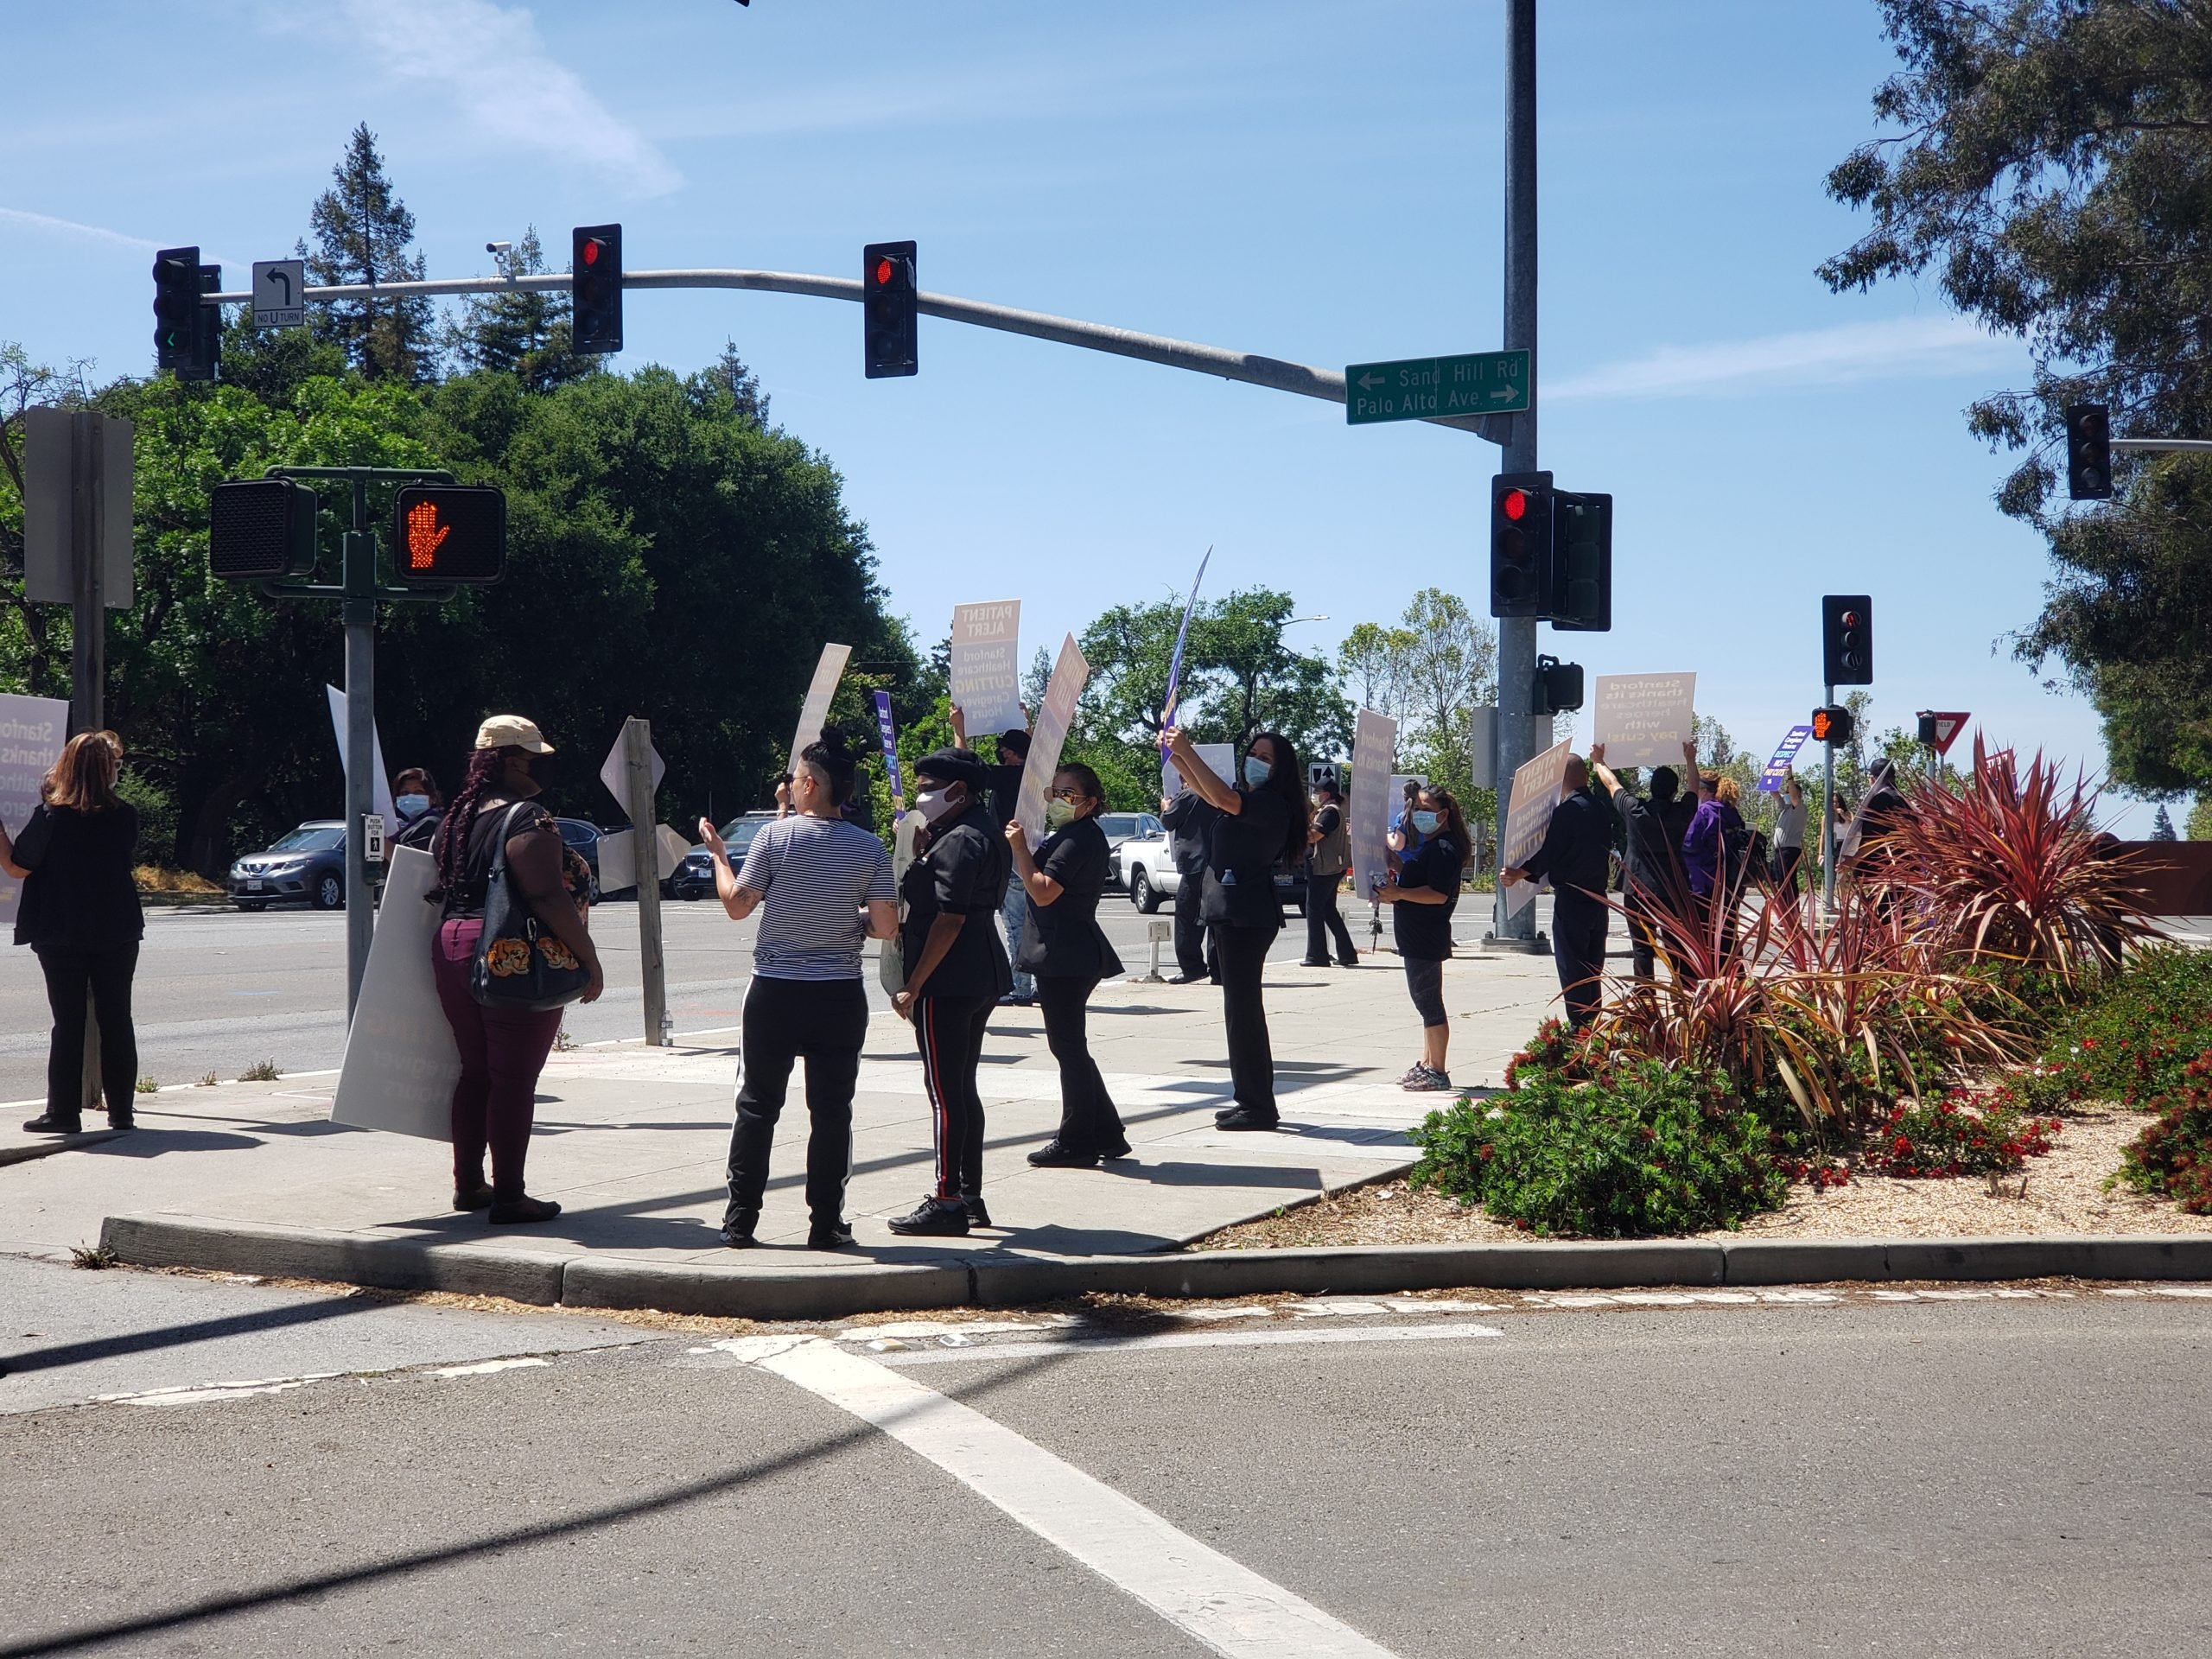 Healthcare workers demonstrate while maintaining social distancing at the corner of Sand Hill Road and El Camino Real.